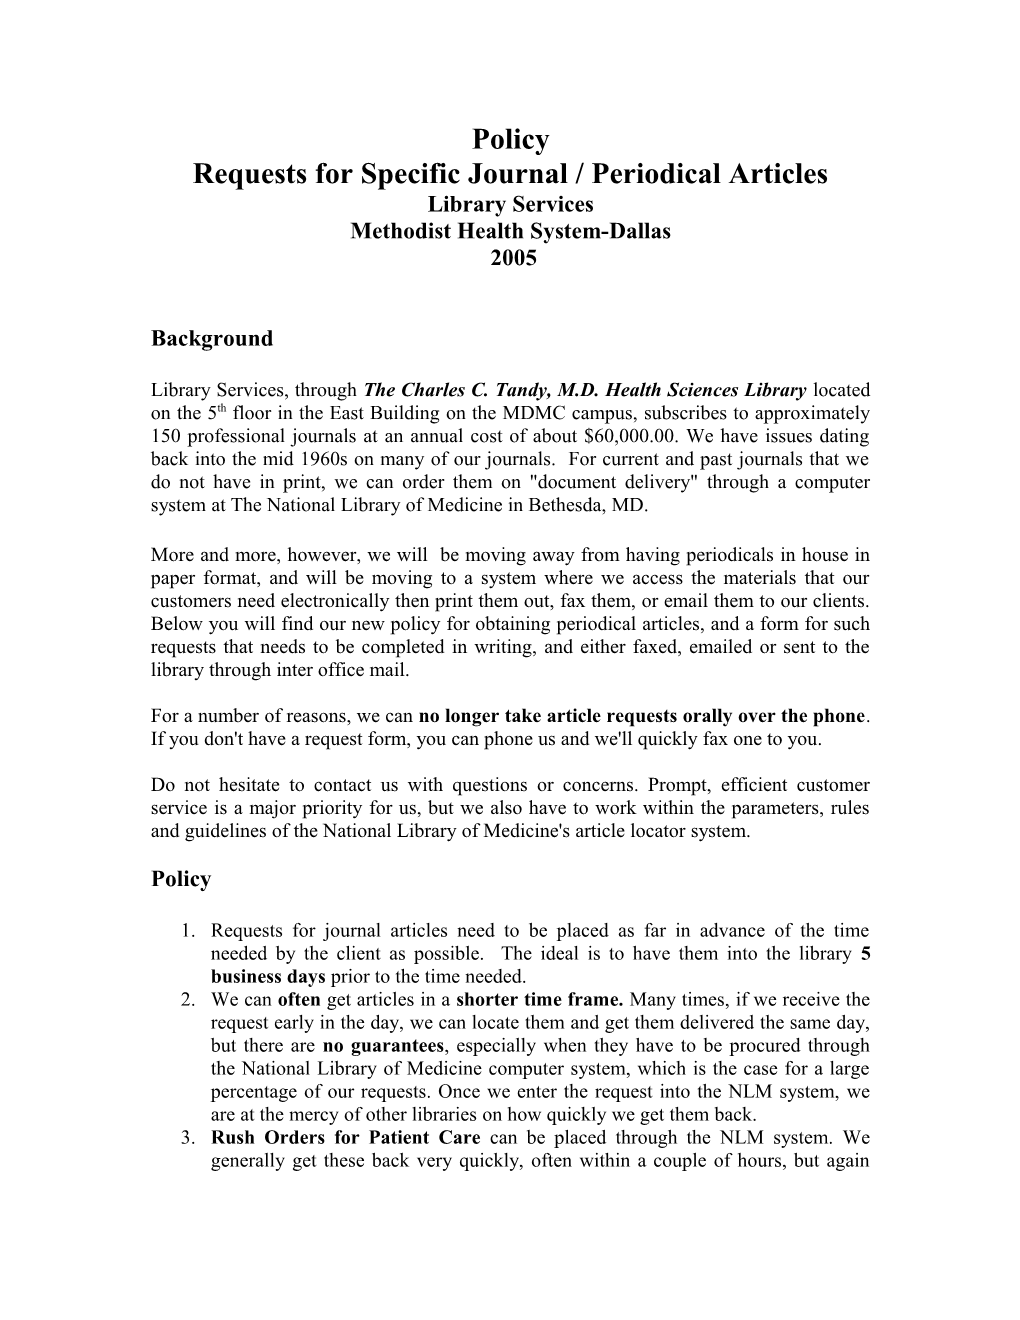 Requests for Specific Journal / Periodical Articles